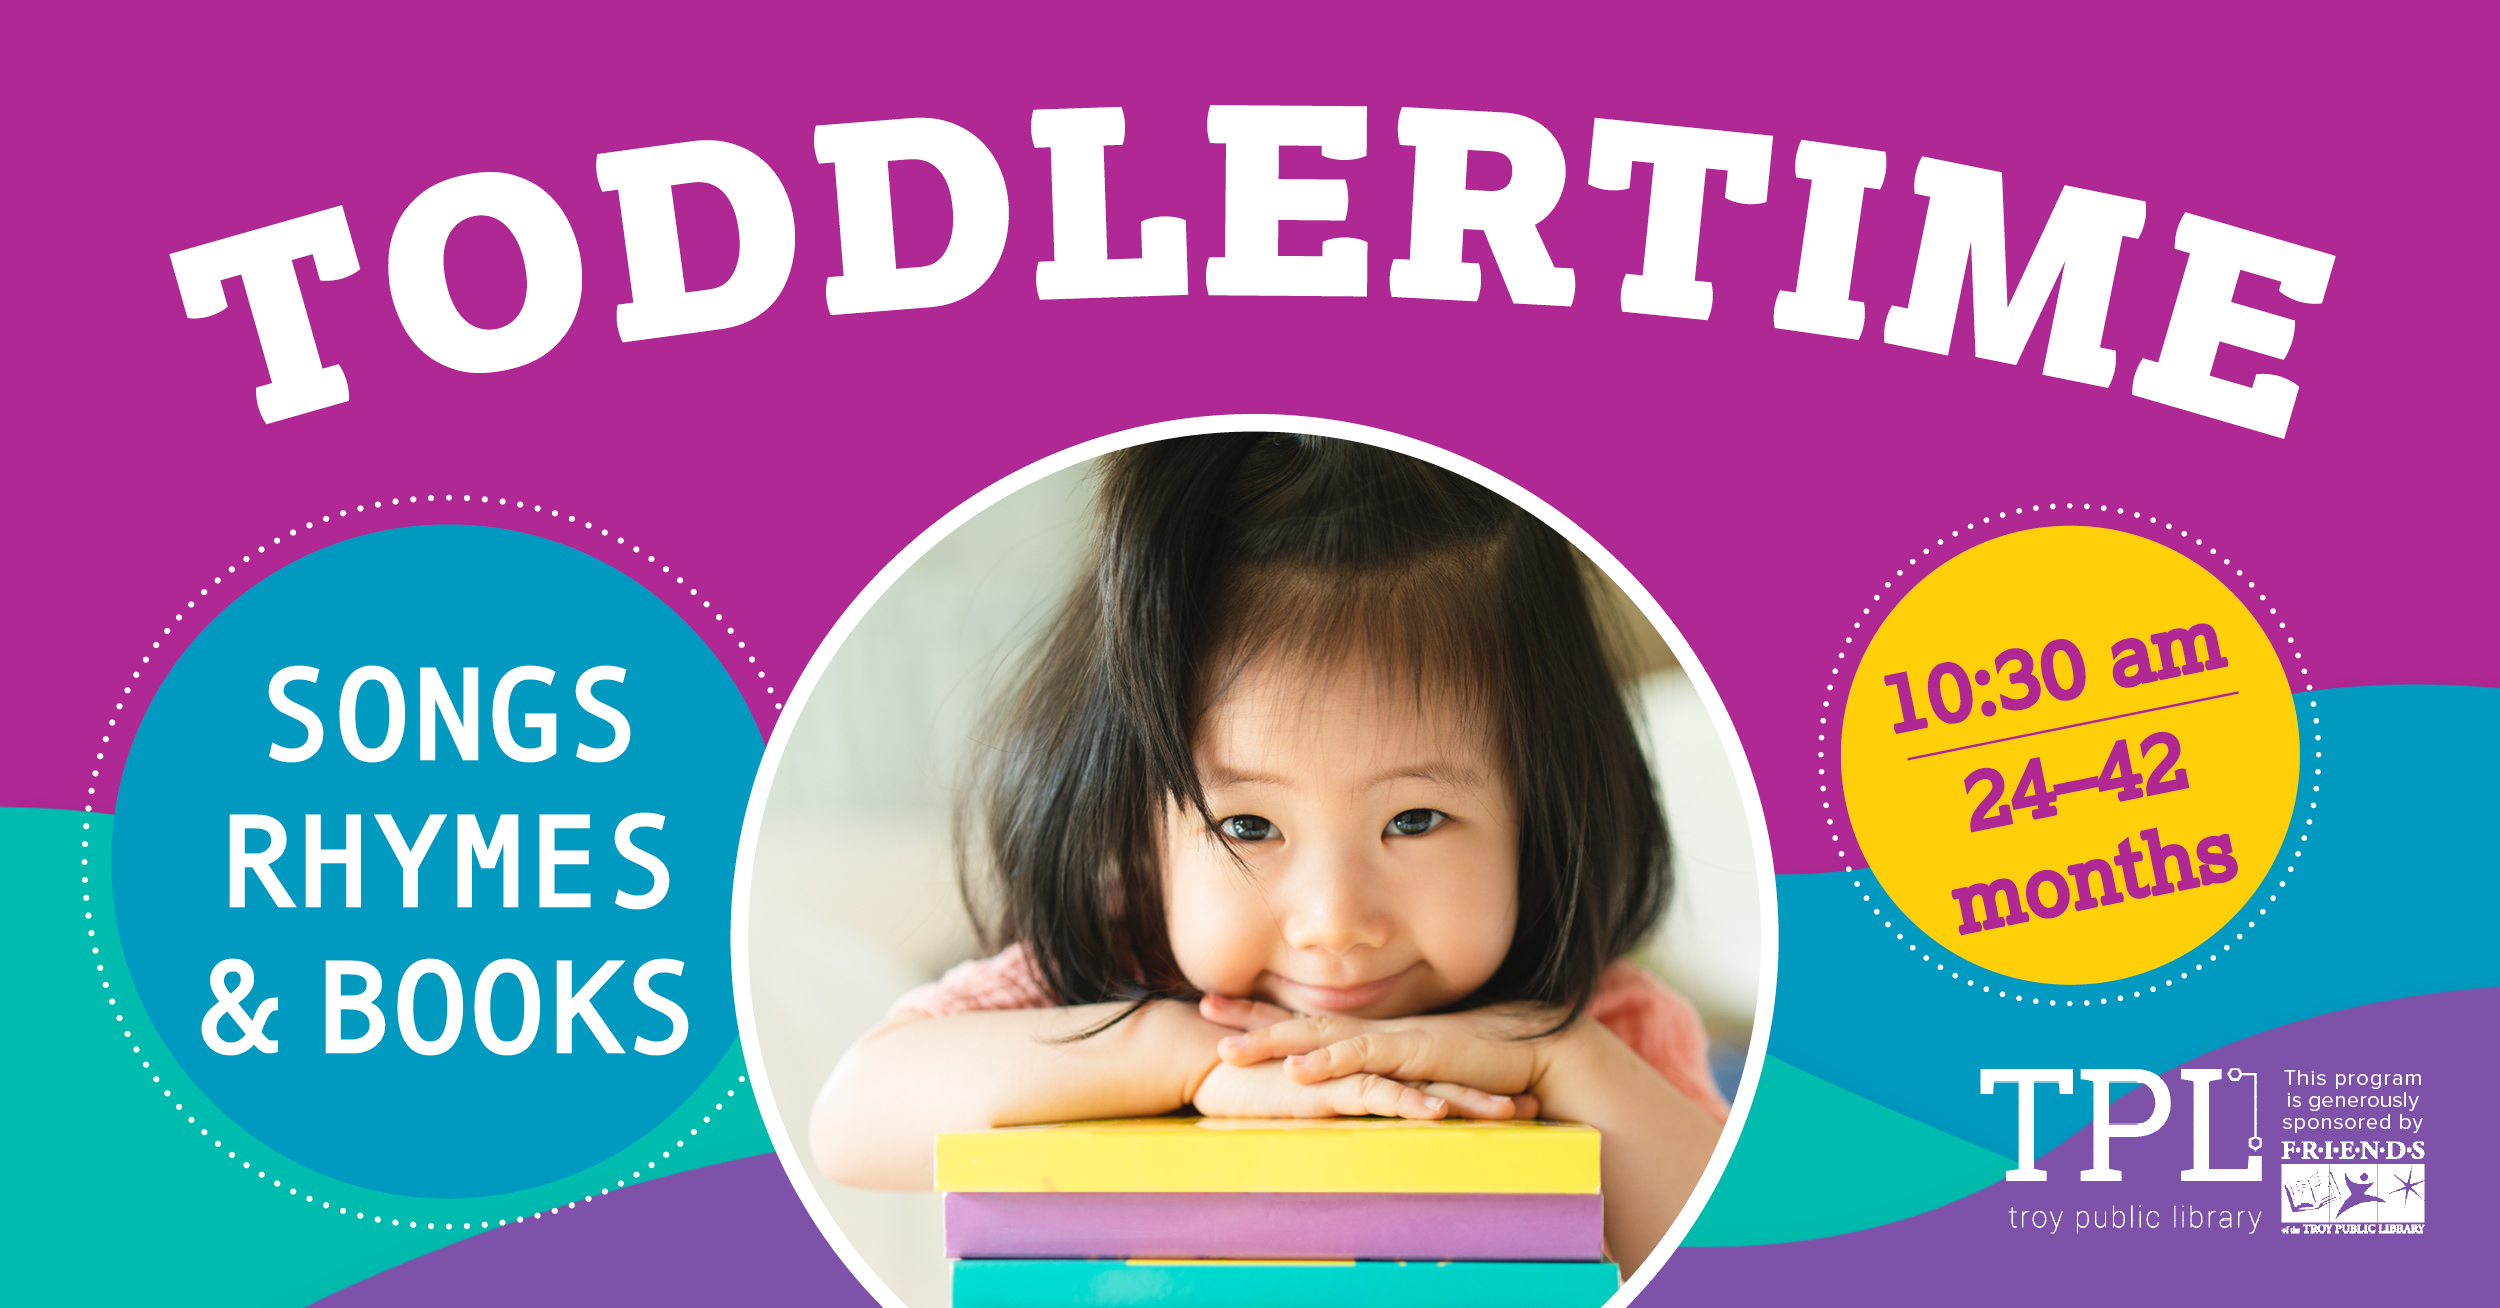 A picture of a toddler with books, along with the text Toddlertime, ages 2 to 3 and a half, 10:30 AM, songs, rhymes, and books. Sponsored by the Friends of the Troy Public Library.